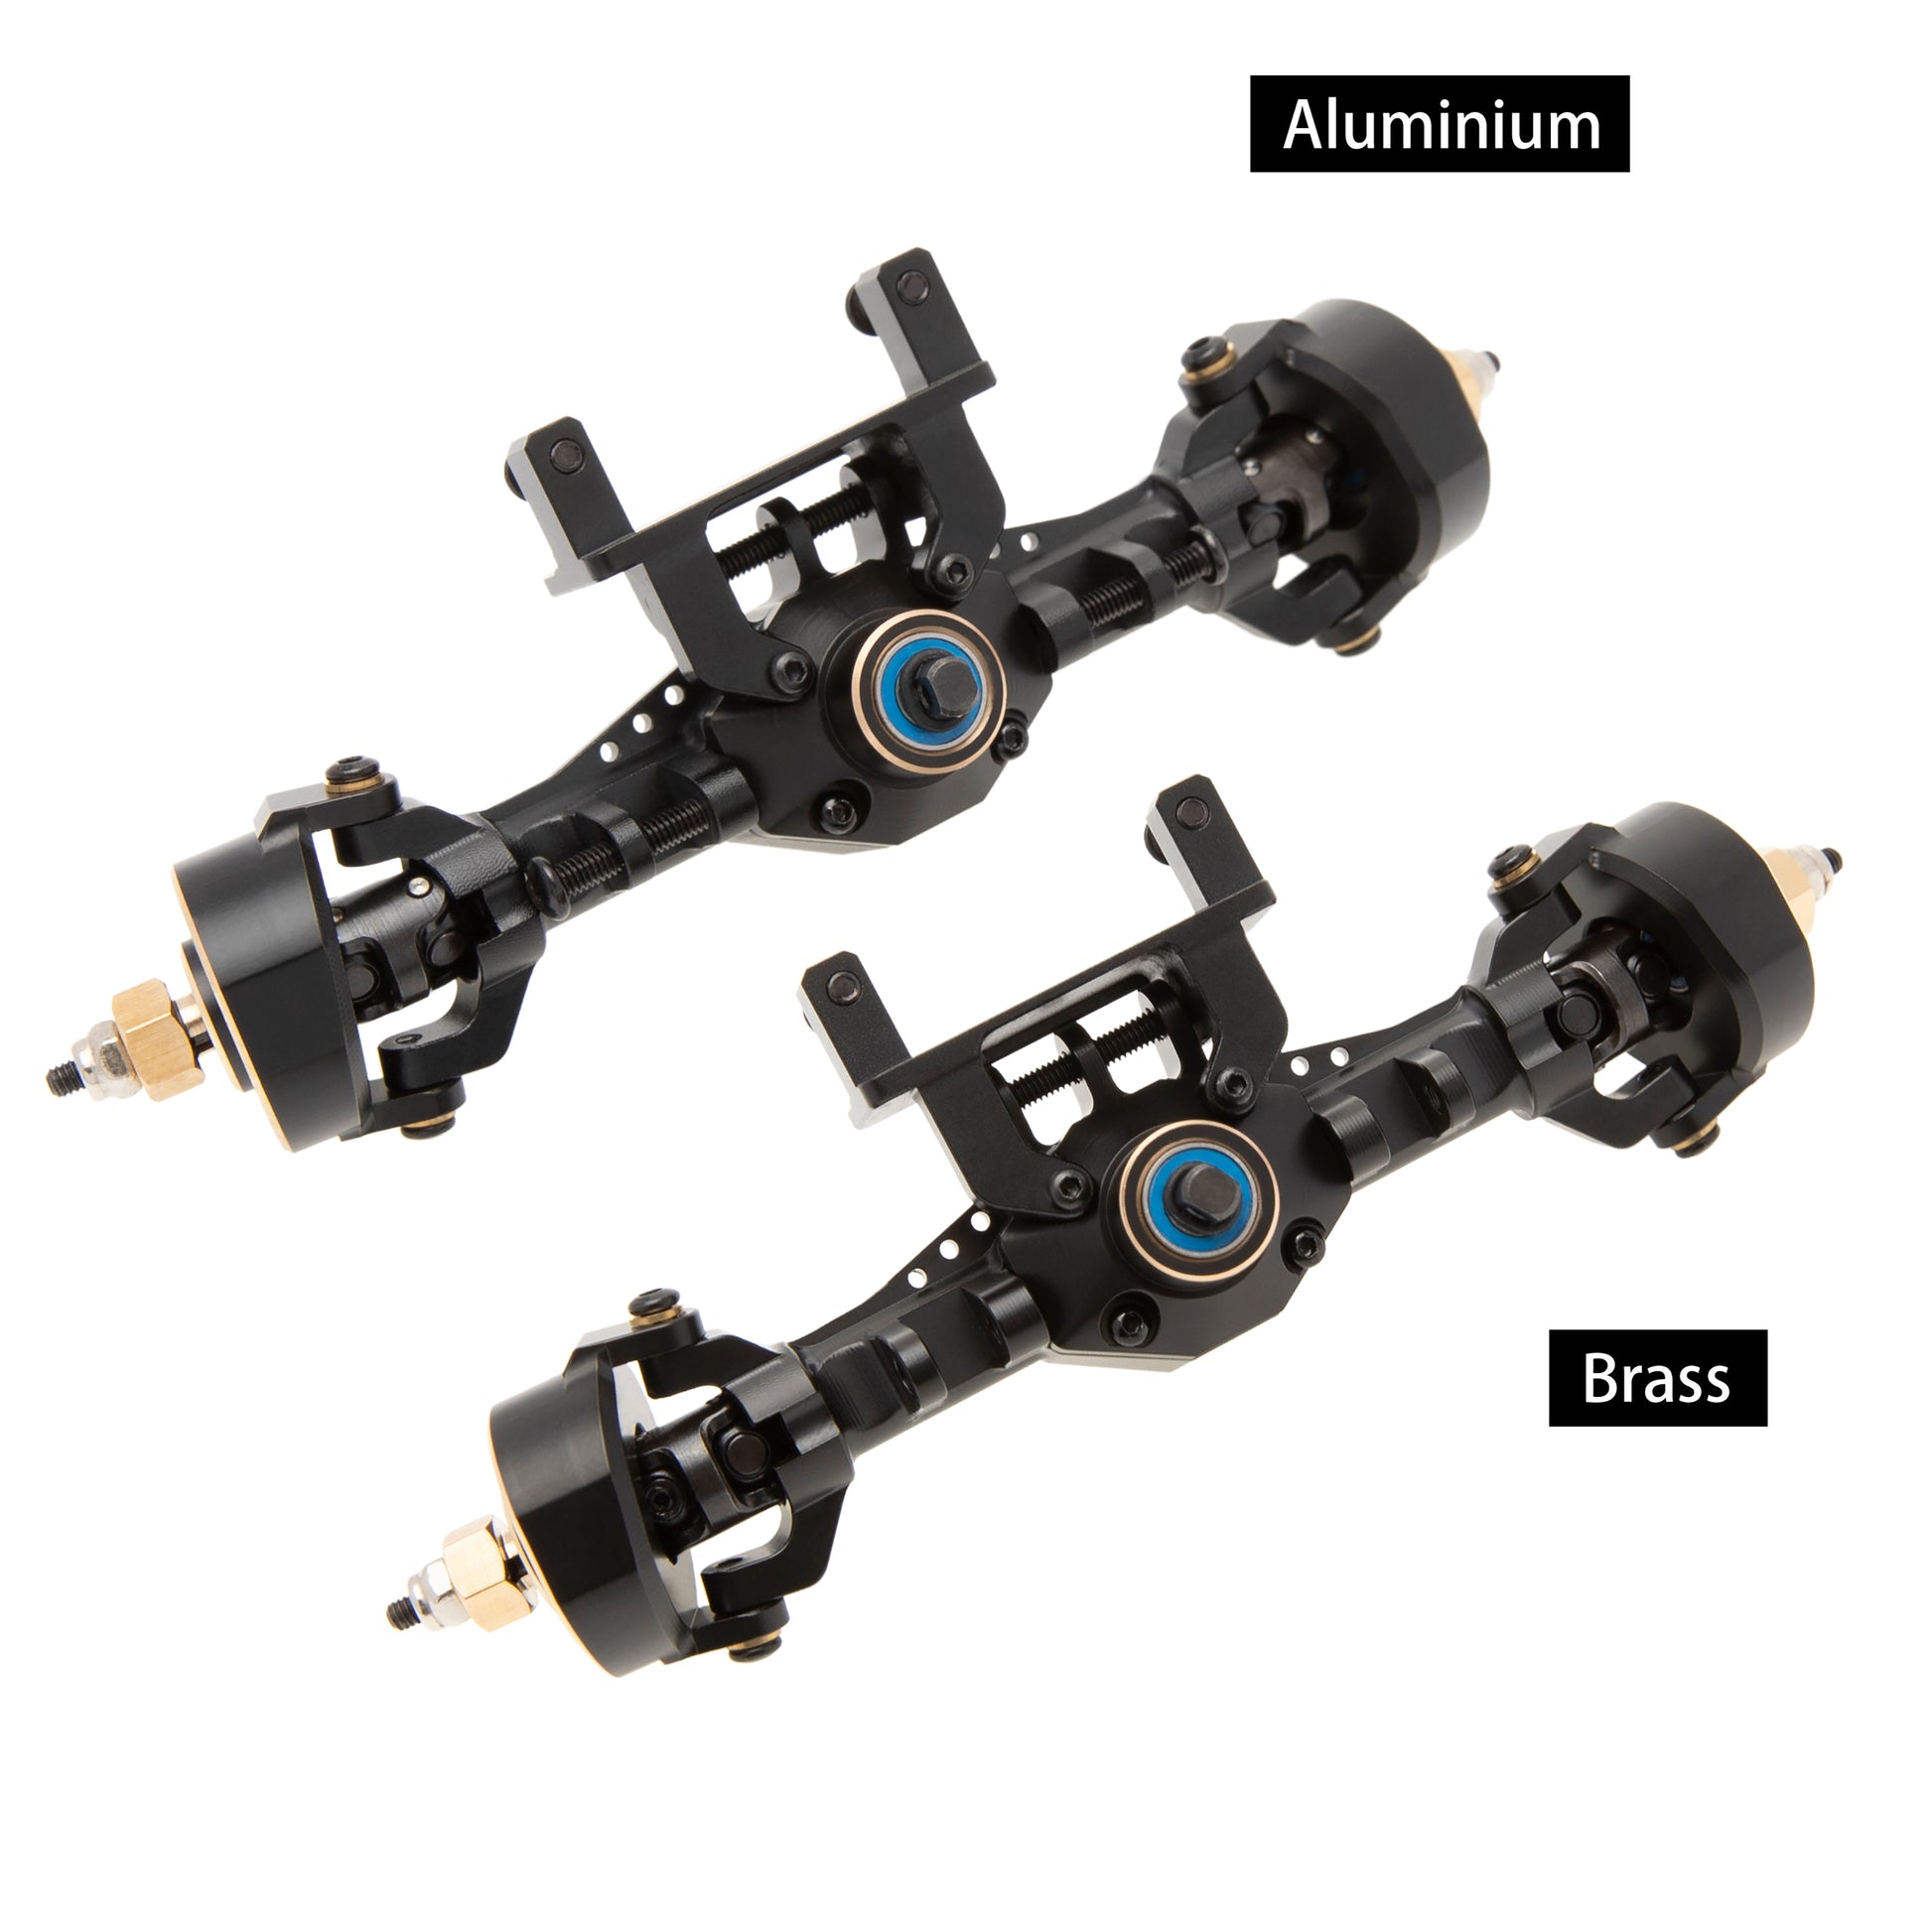 Black Aluminum and brass Isokinetic 3-Section CVD Front Axles